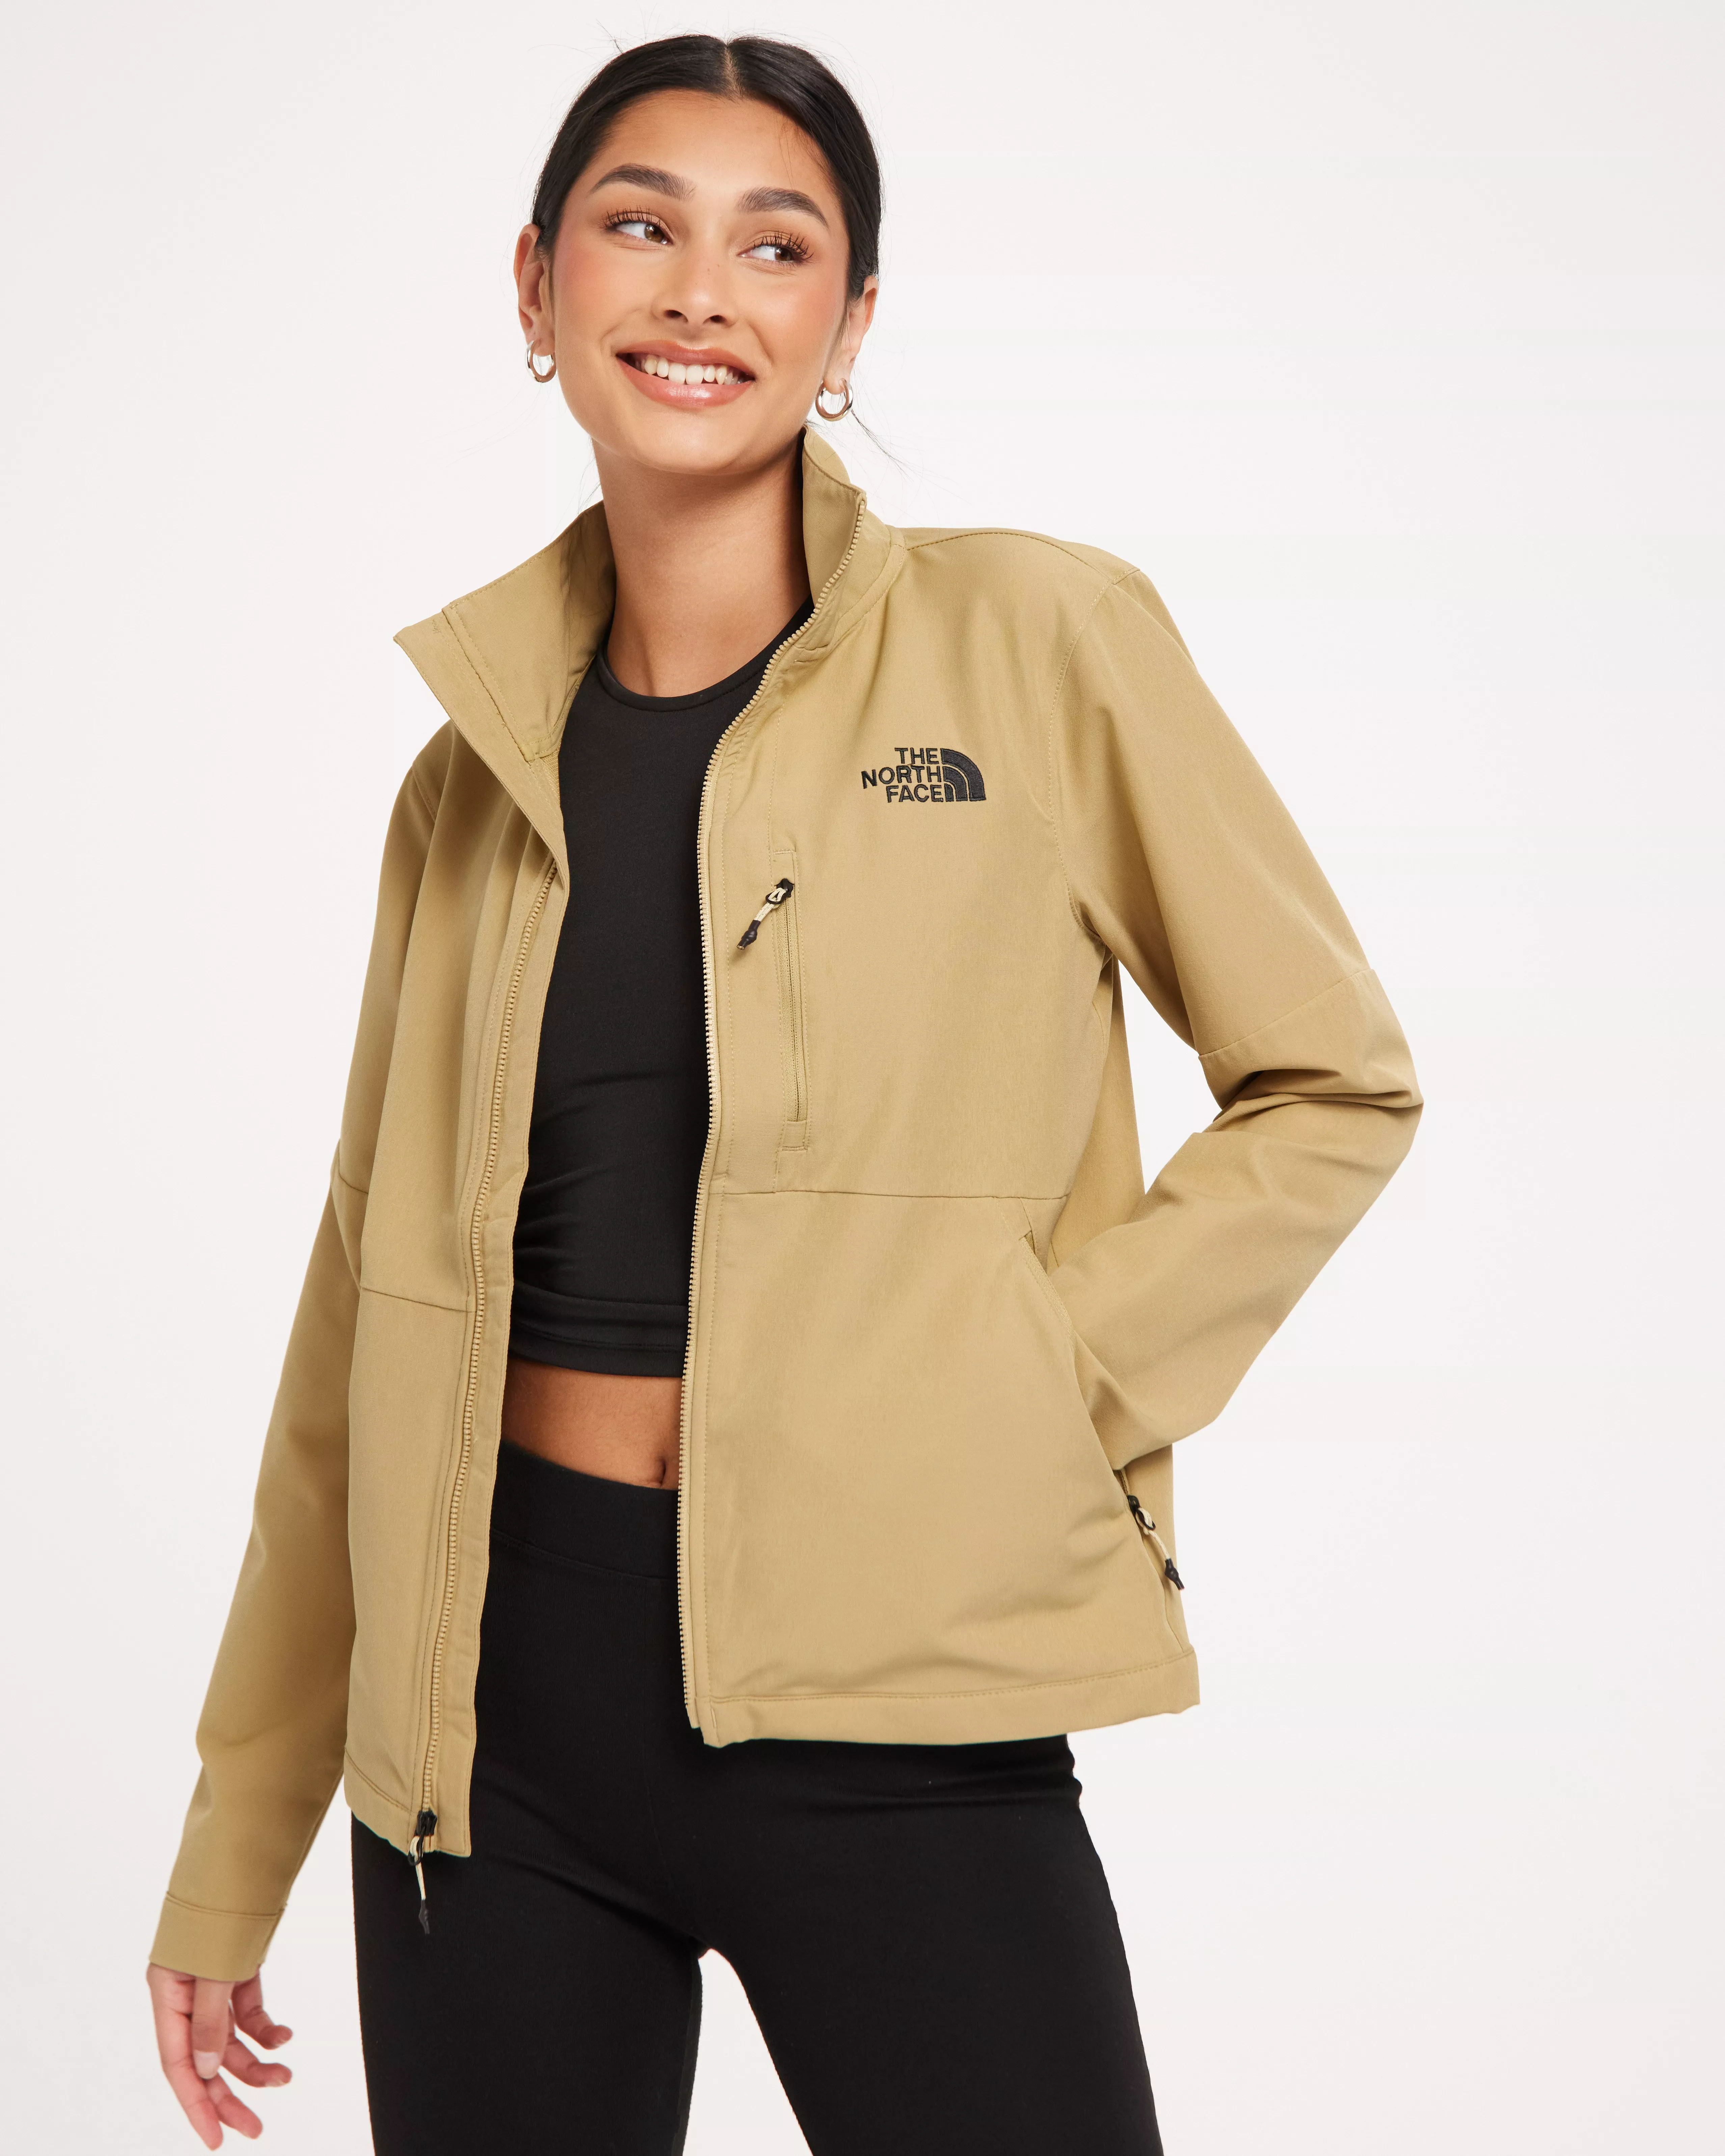 The Face SOFTSHELL JACKET - Beige | Nelly.com